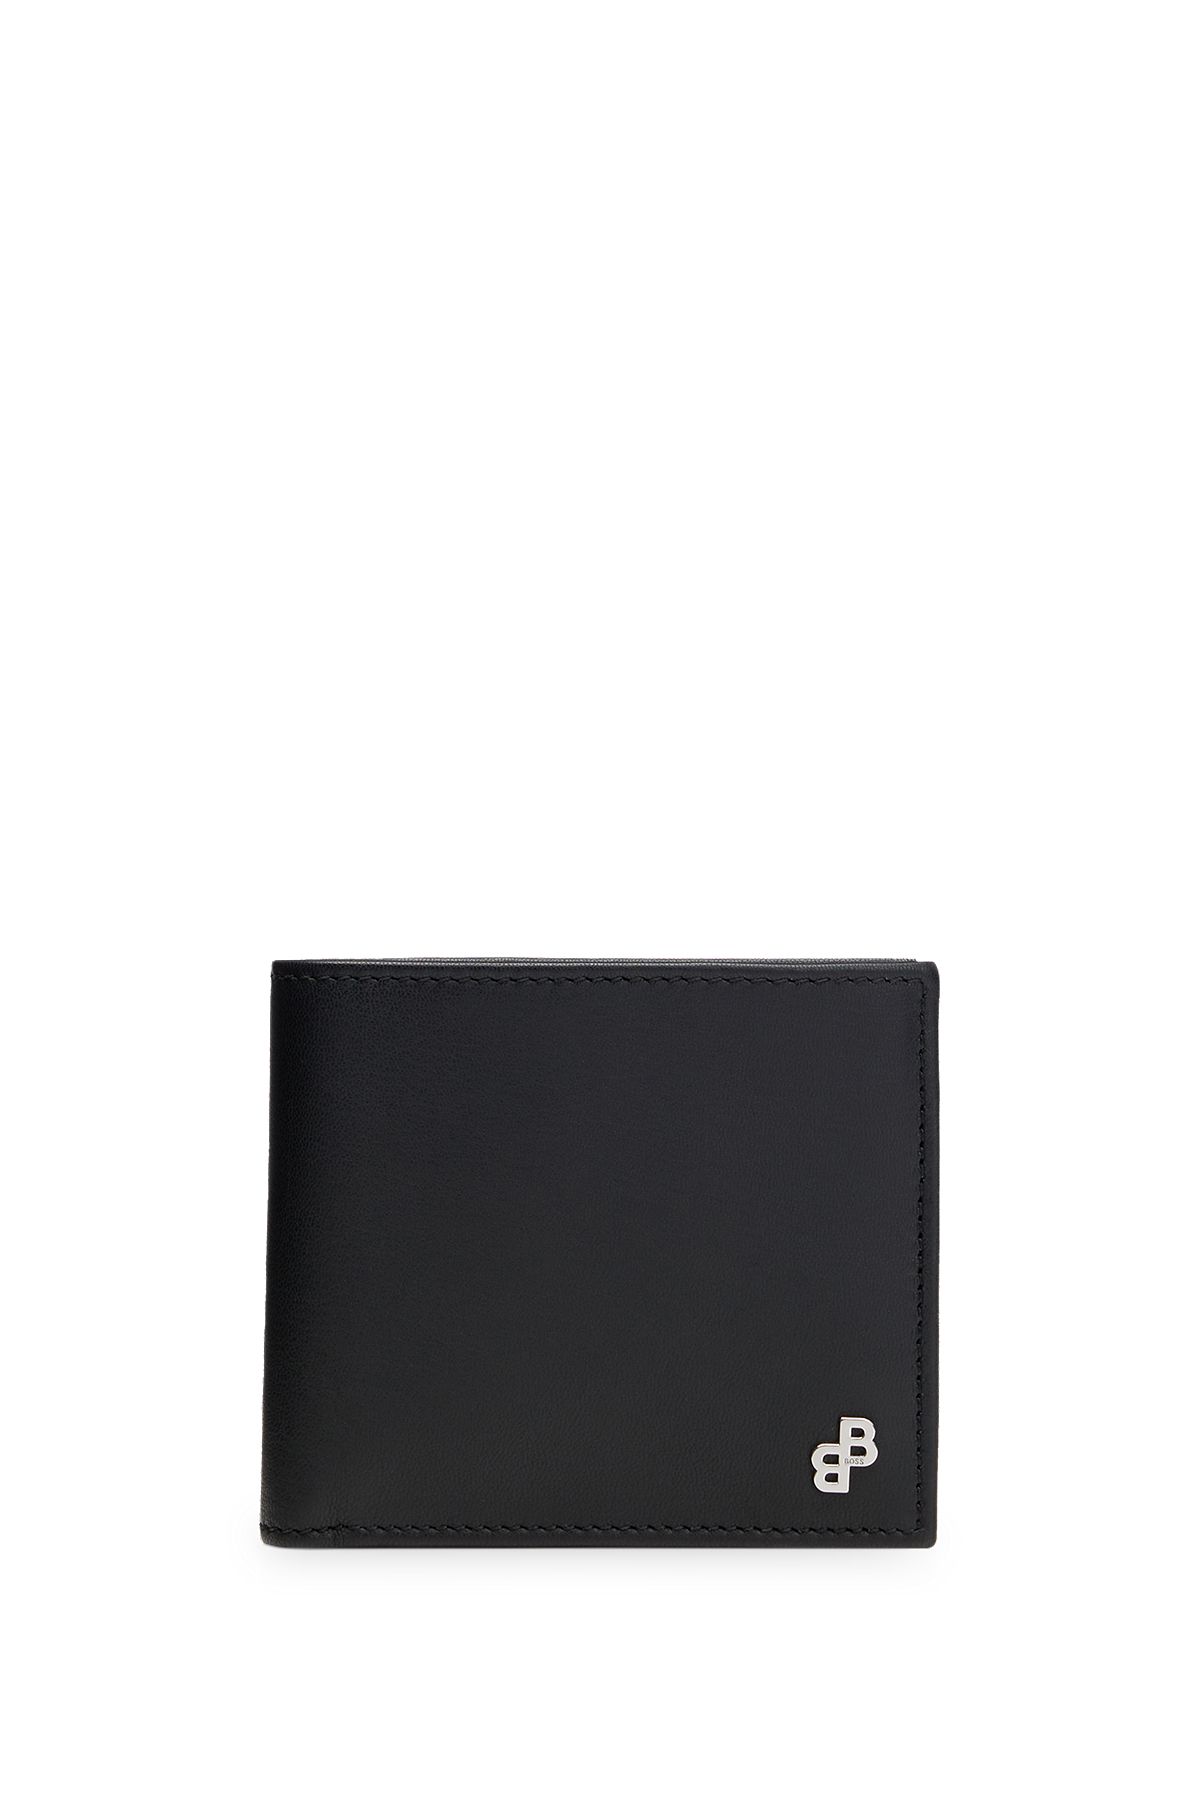 Monogram-trim leather wallet with eight card slots, Black